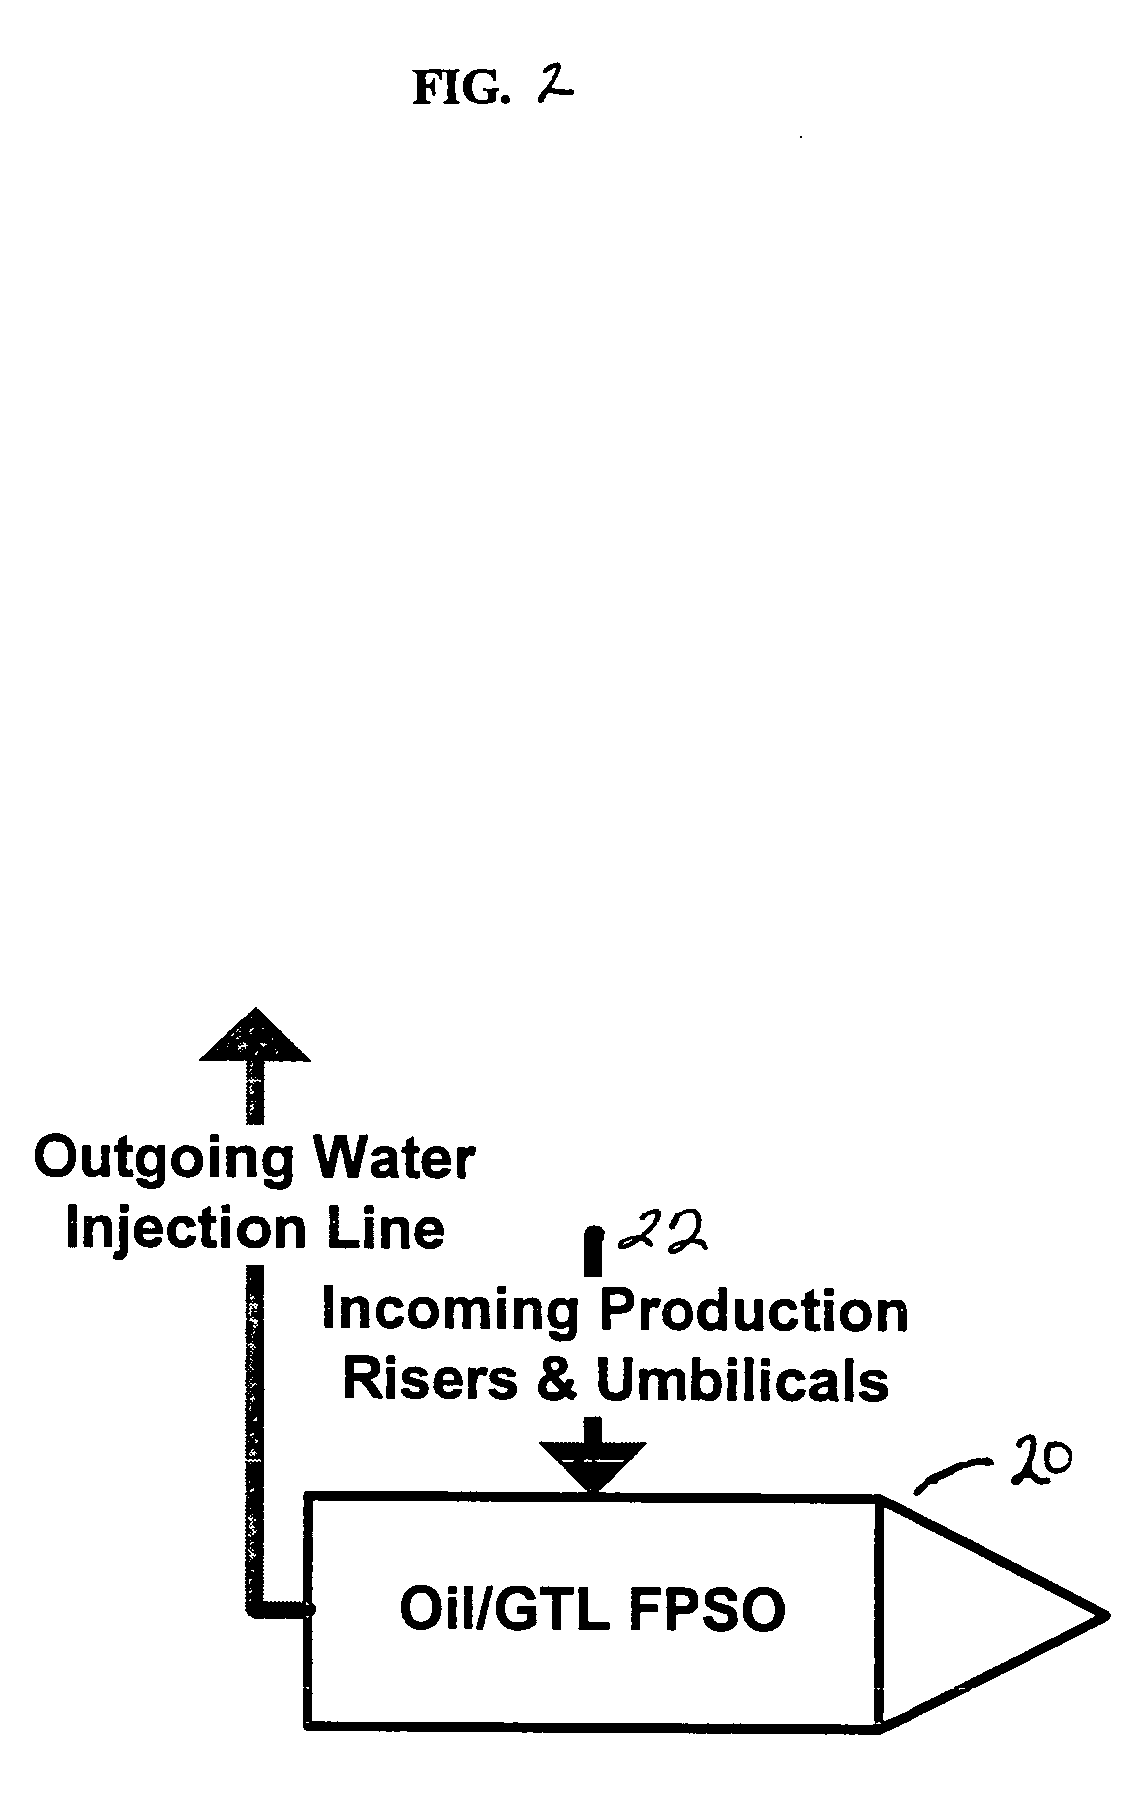 Movable gas-to-liquid system and process